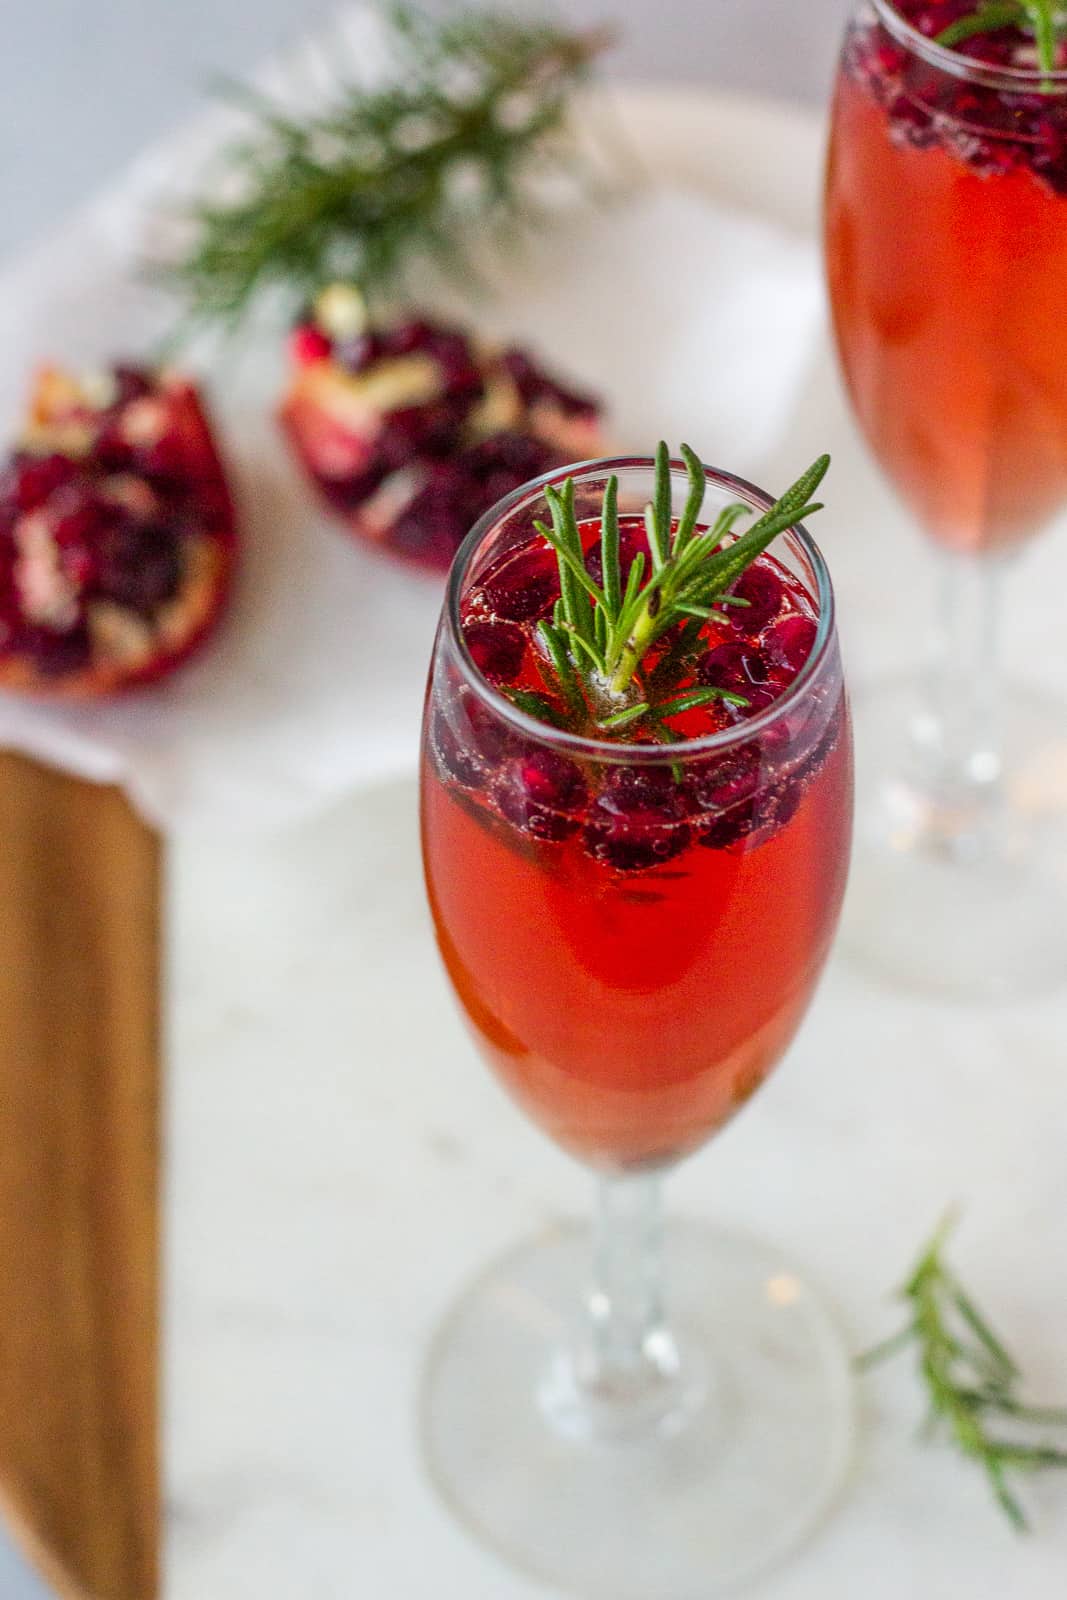 Up close view of cocktail with pomegranate seeds and rosemary.